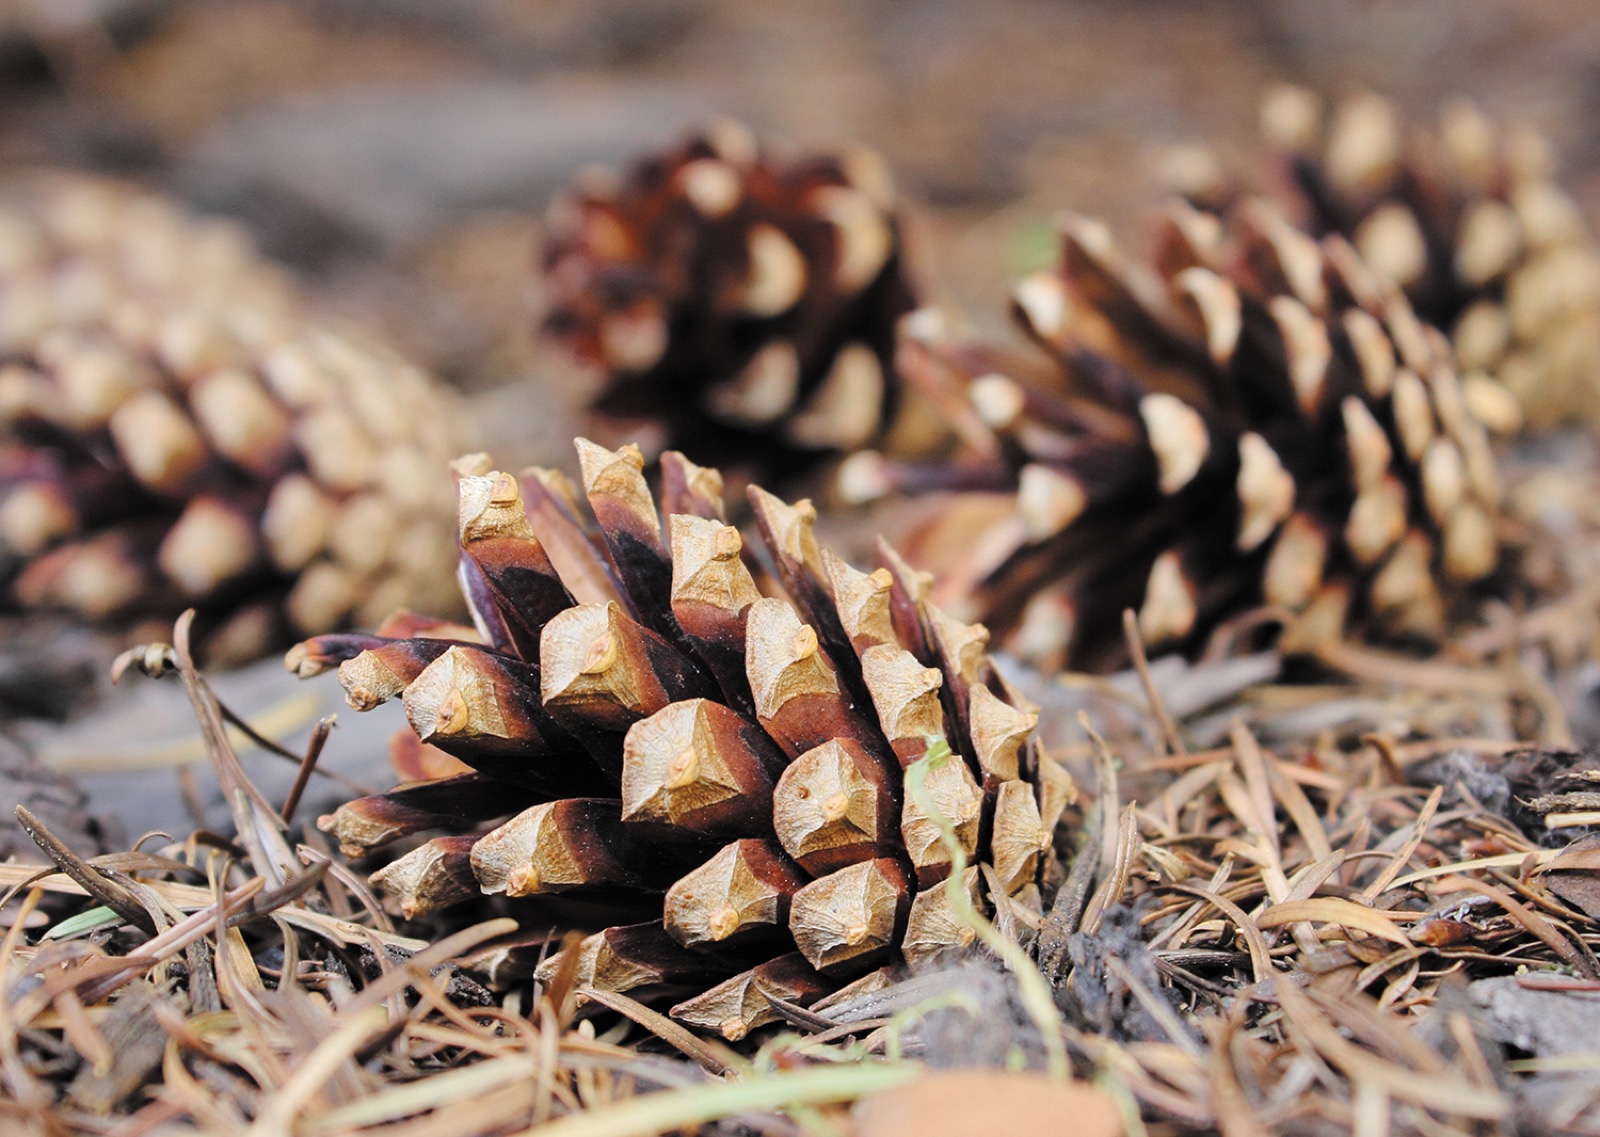 Can You Pass This “Jeopardy!” Trivia Quiz About Animals? Pine Cones